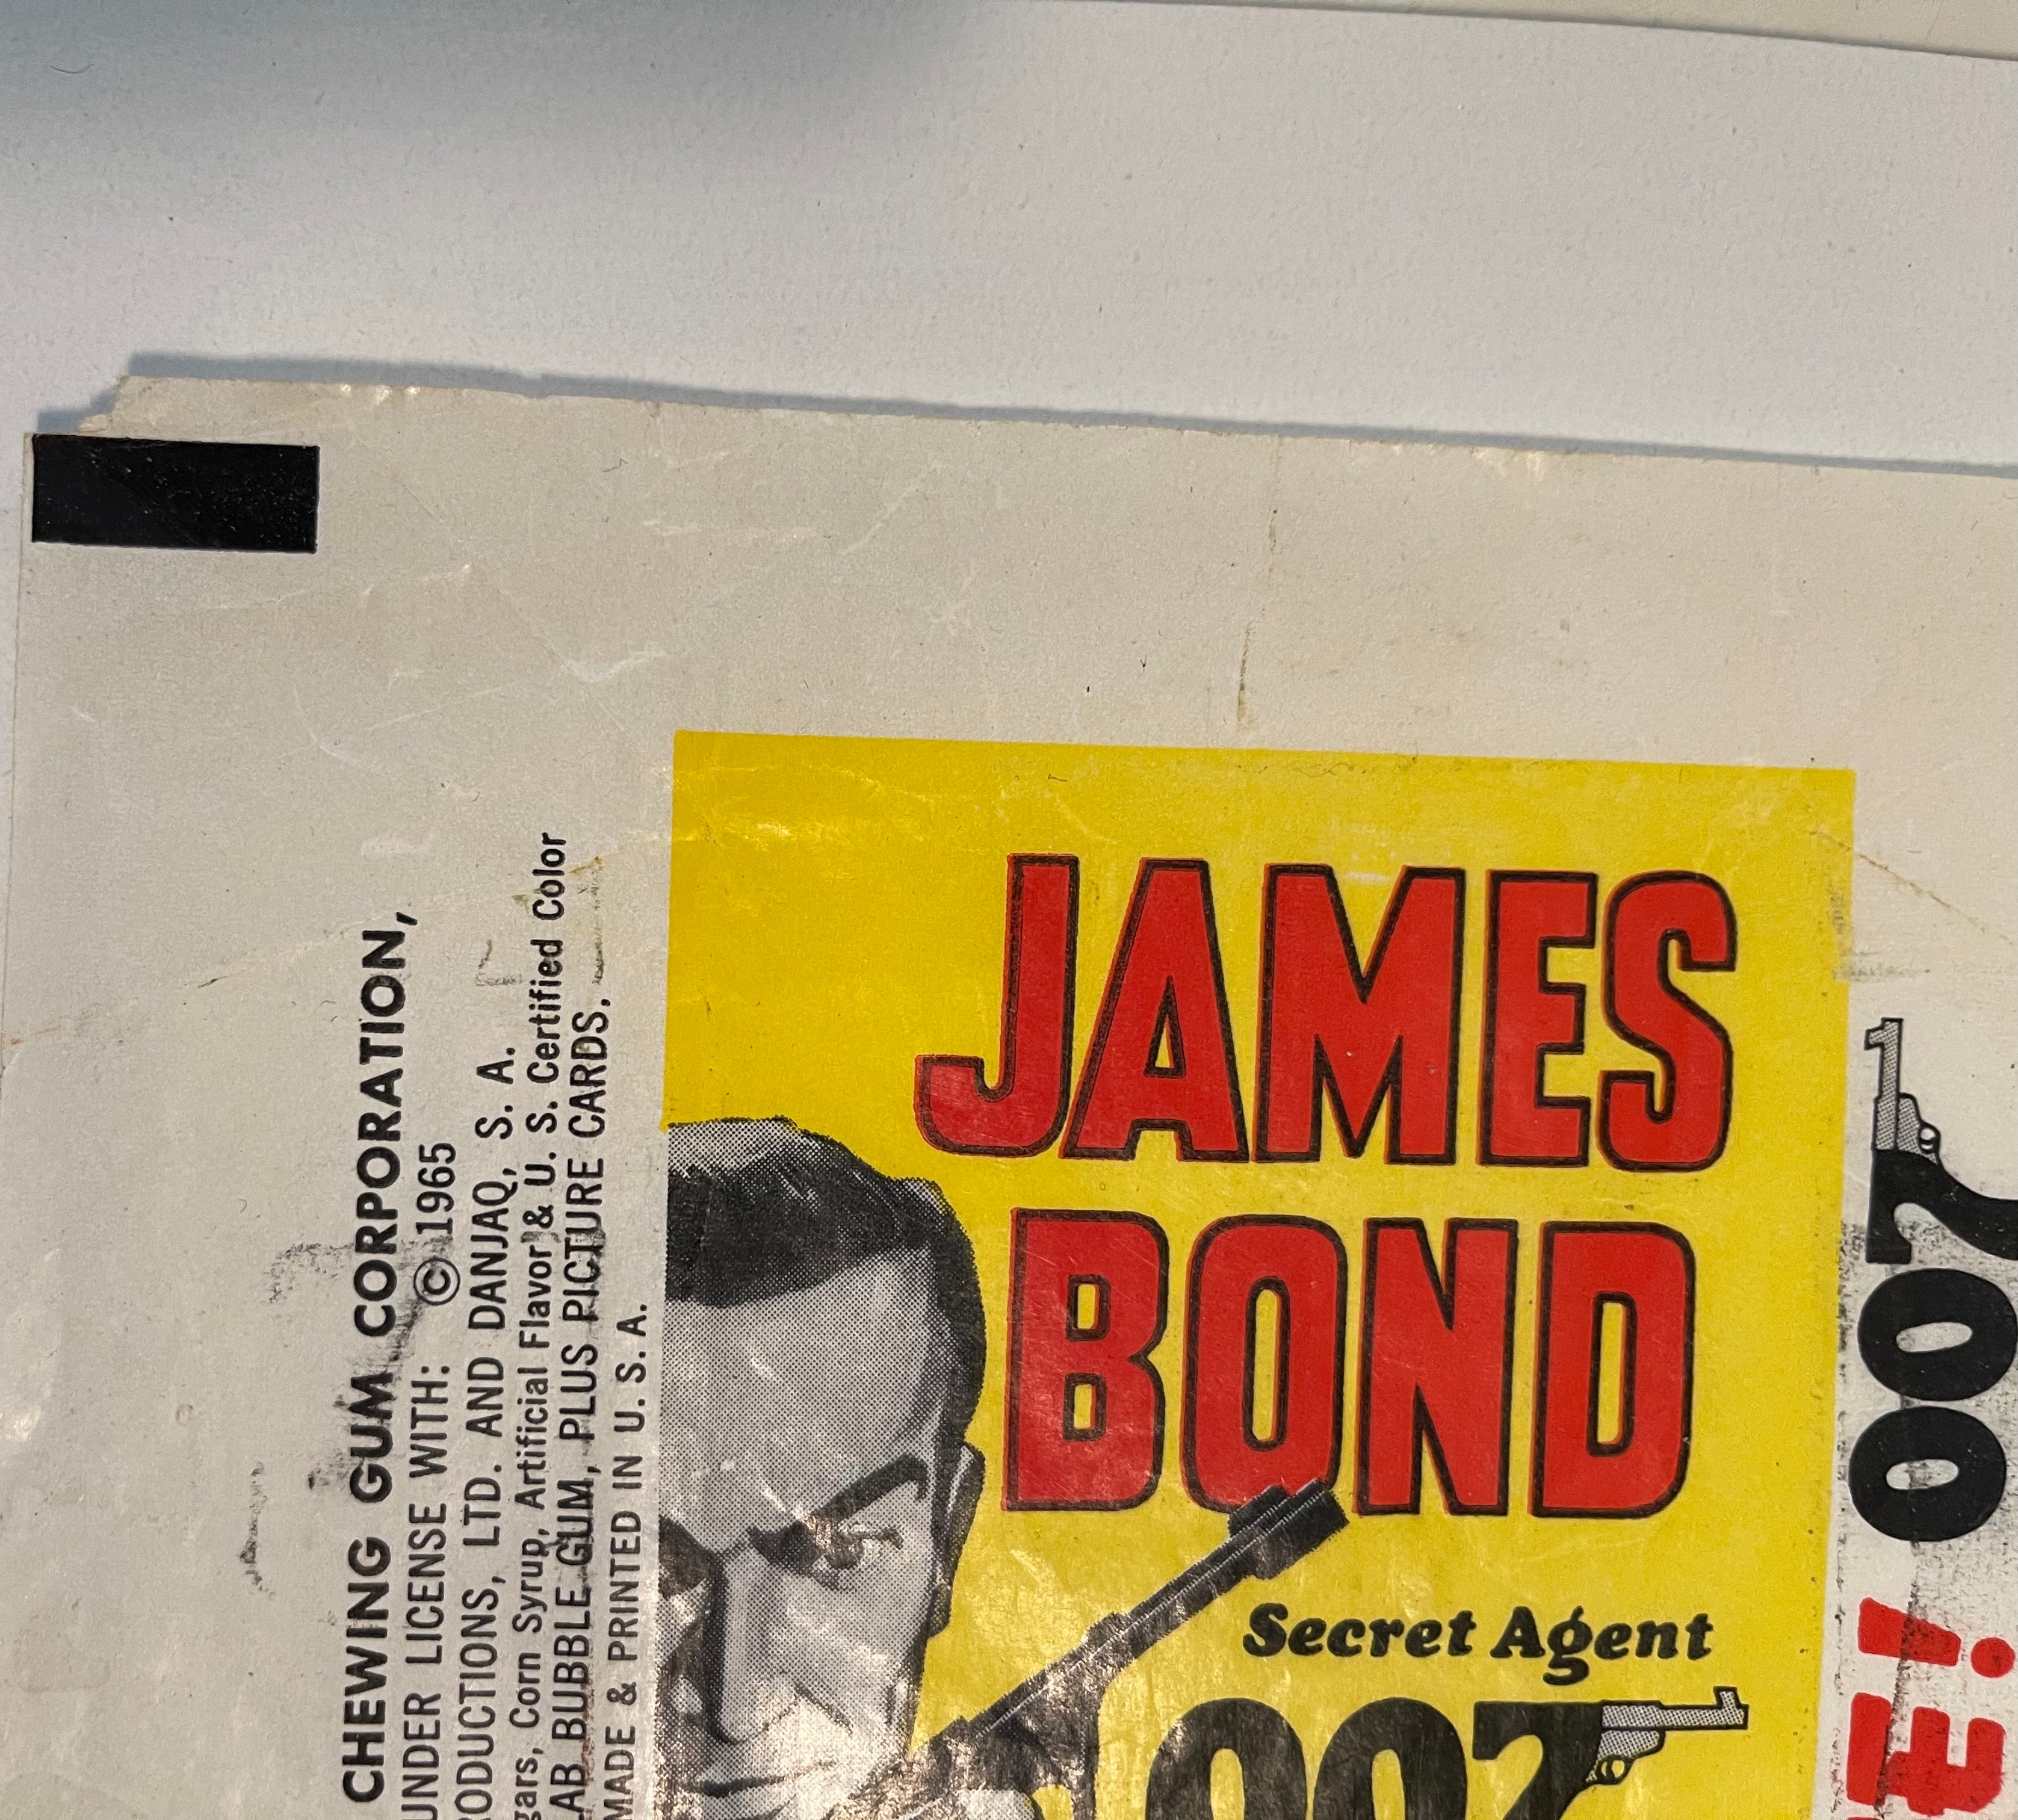 James Bond rare card wrapper from 1965